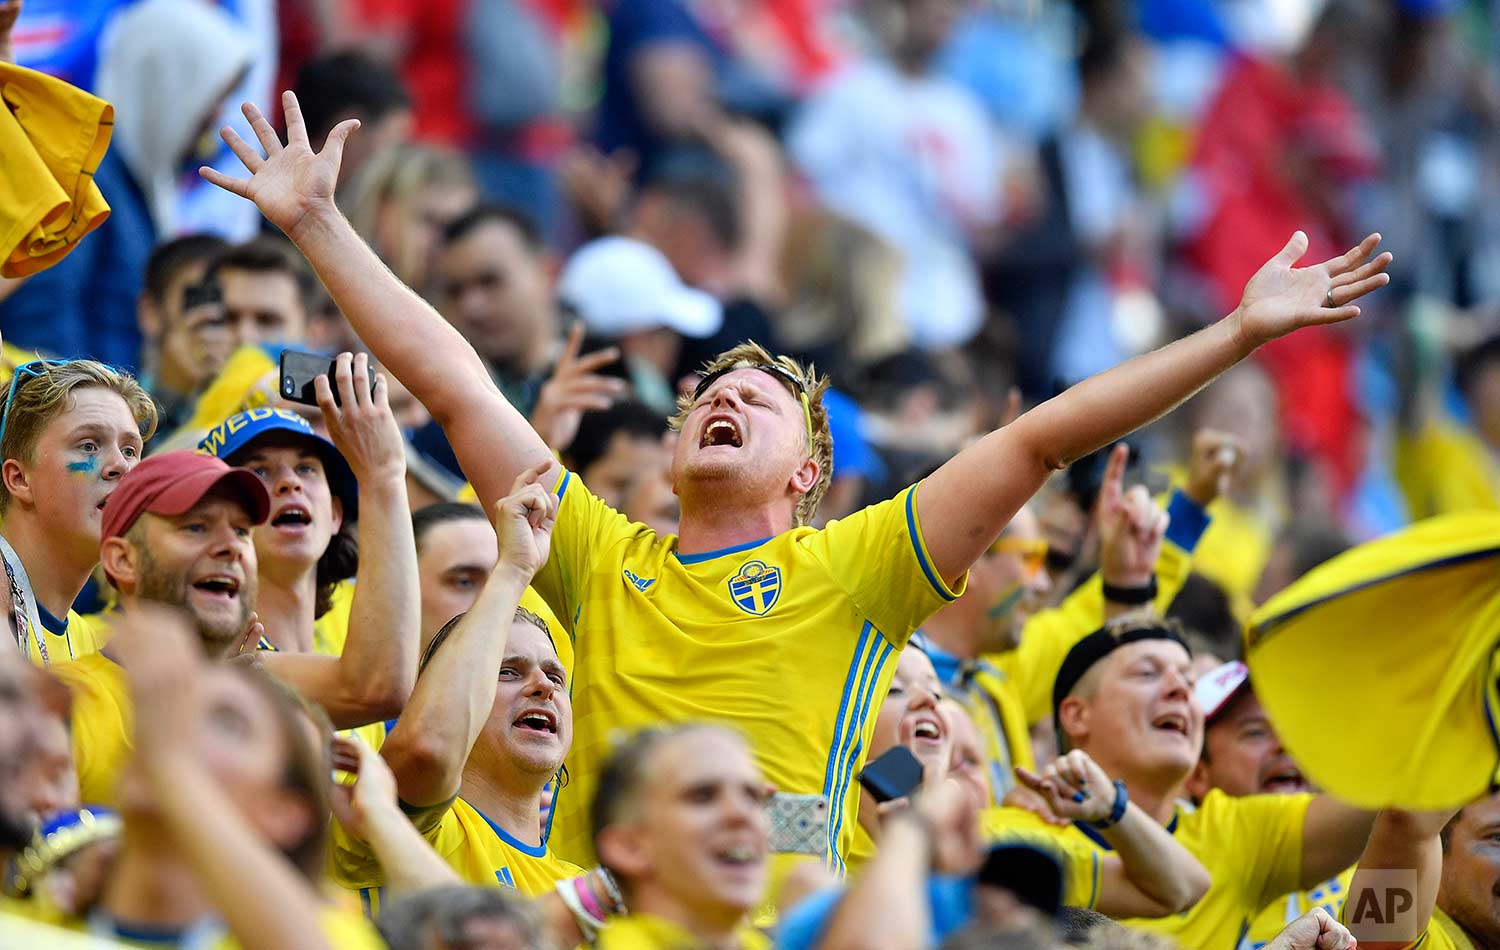  Sweden supporters celebrate after their team won the round of 16 match between Switzerland and Sweden at the 2018 soccer World Cup in the St. Petersburg Stadium, in St. Petersburg, Russia, Tuesday, July 3, 2018. (AP Photo/Martin Meissner) 